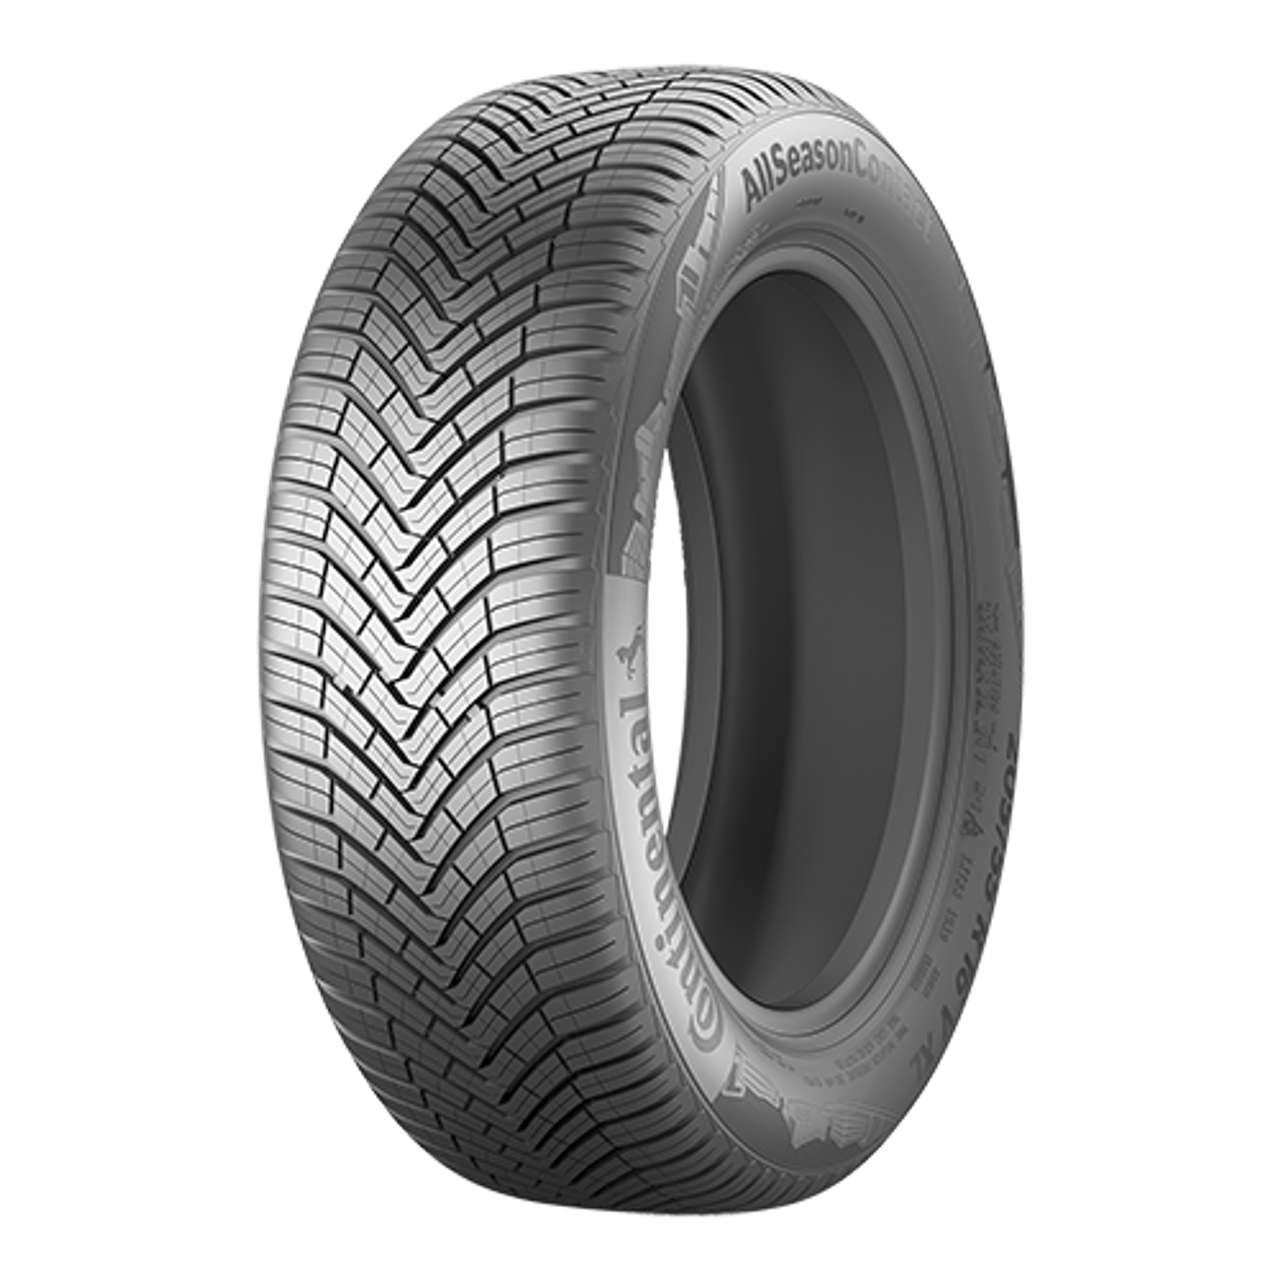 CONTINENTAL ALLSEASONCONTACT (+) (EVc) 235/50R19 99T BSW